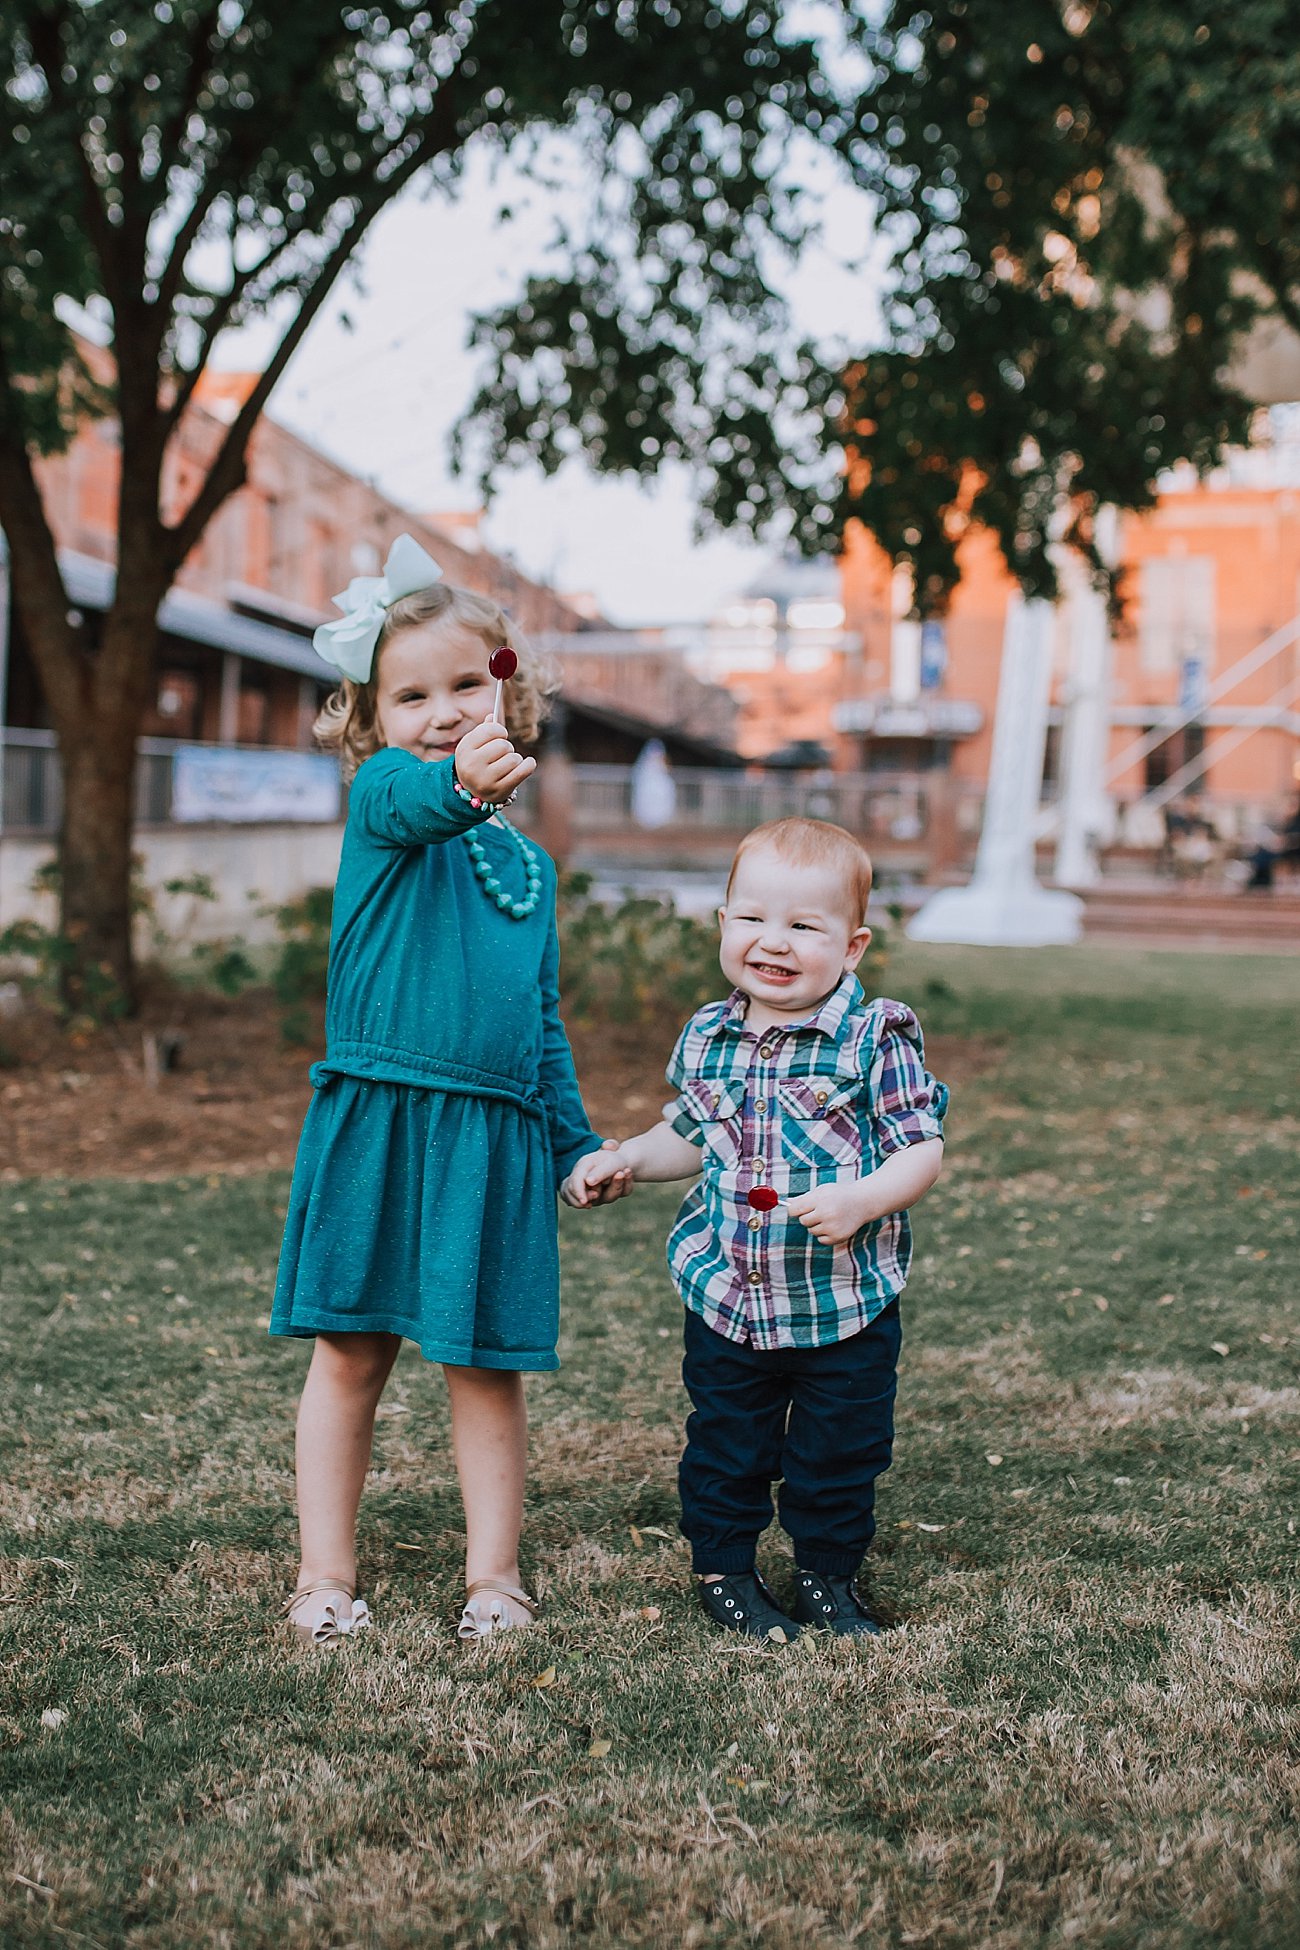 Family Photography - Durham, North Carolina - The Wild Bloom Photography - Stillman Family Photos 2017 (2) - Our Christmas Family Pictures by popular North Carolina blogger Still Being Molly